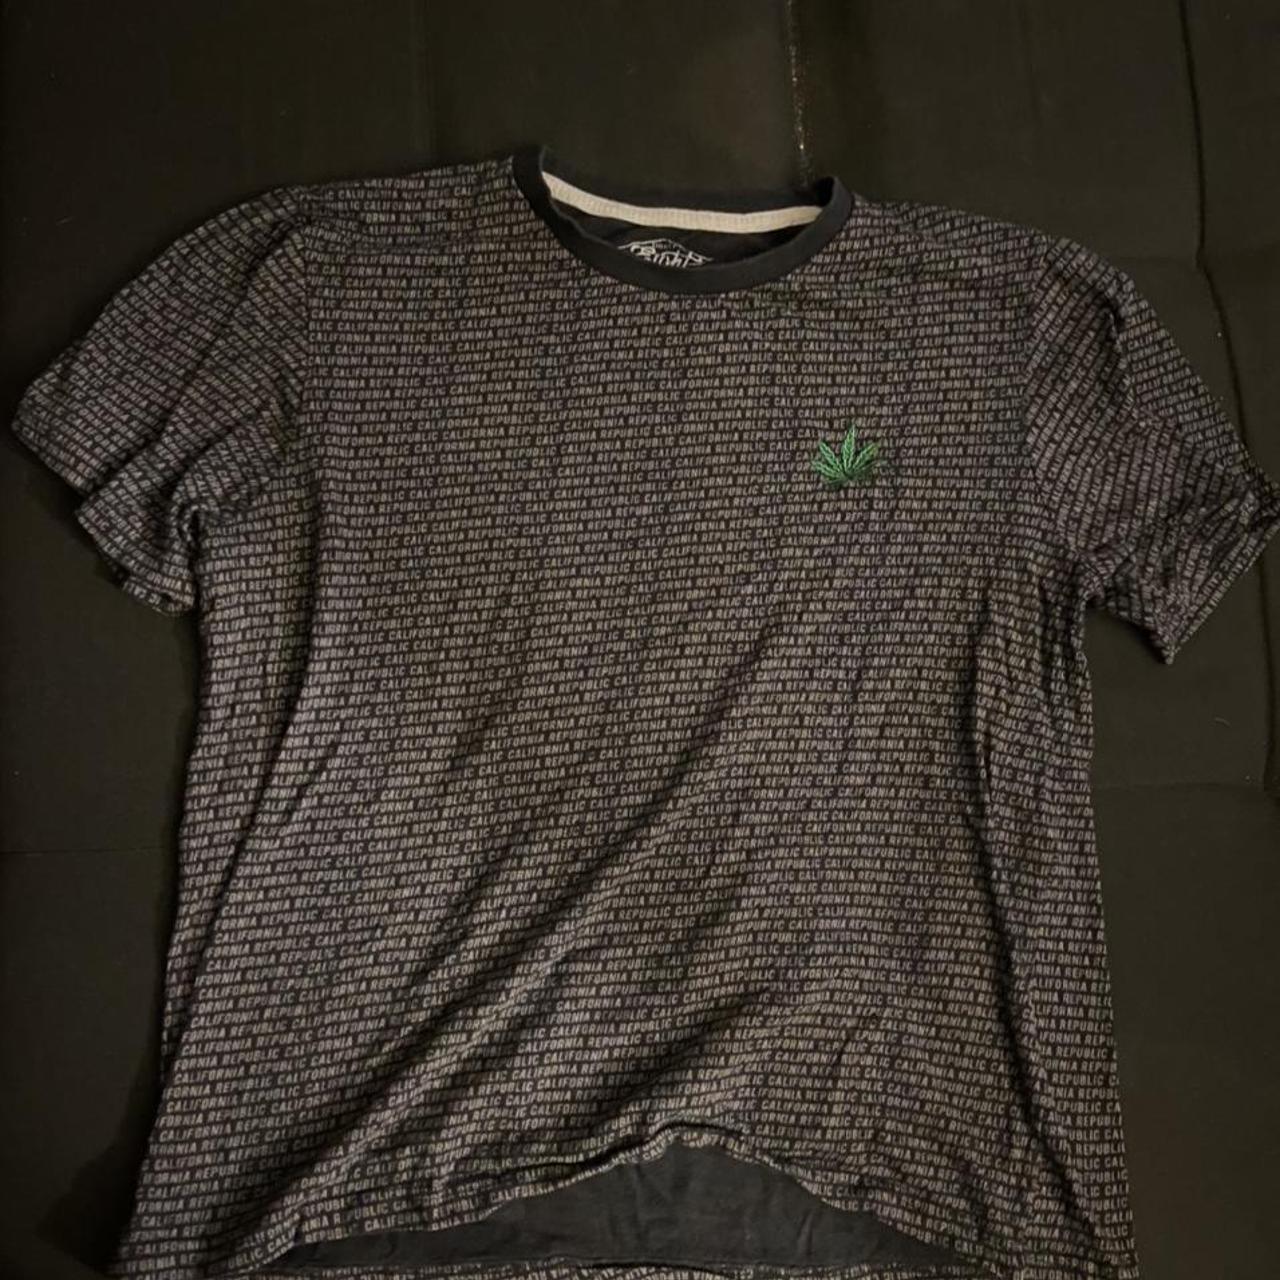 Product Image 2 - Embroidered weed leaf shirt. Mens